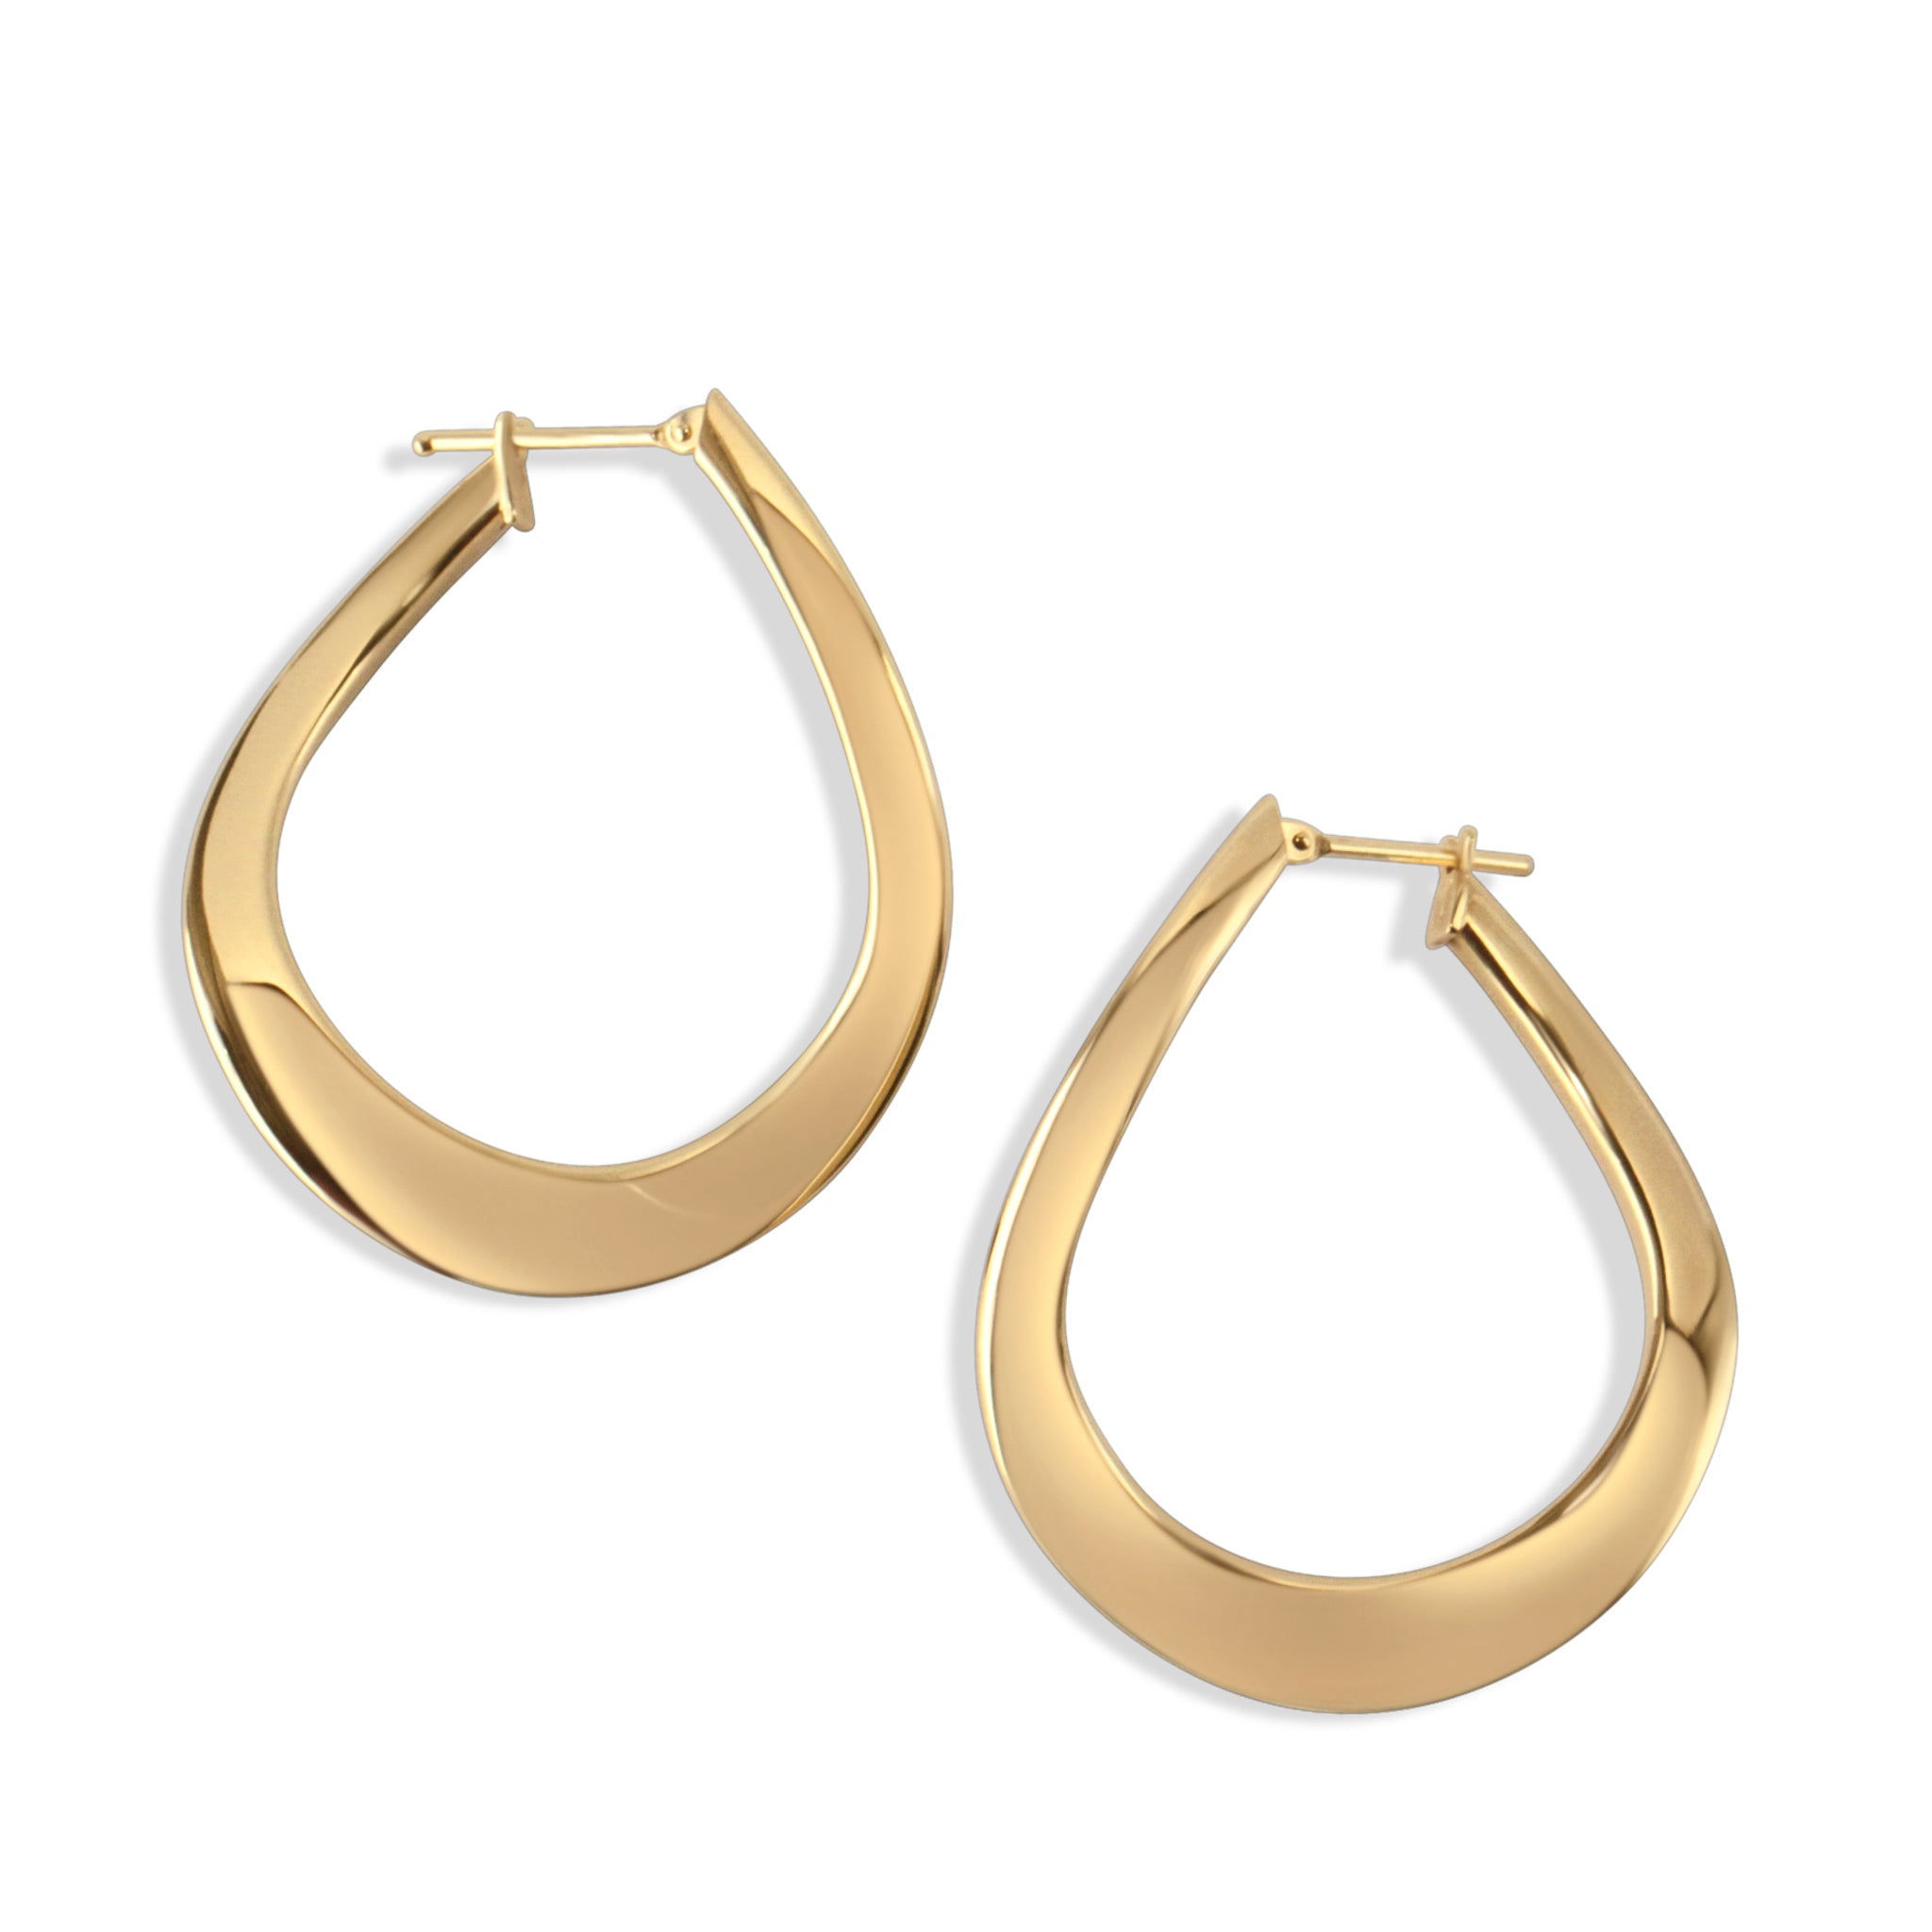 Sculptural gold earrings, statement angle